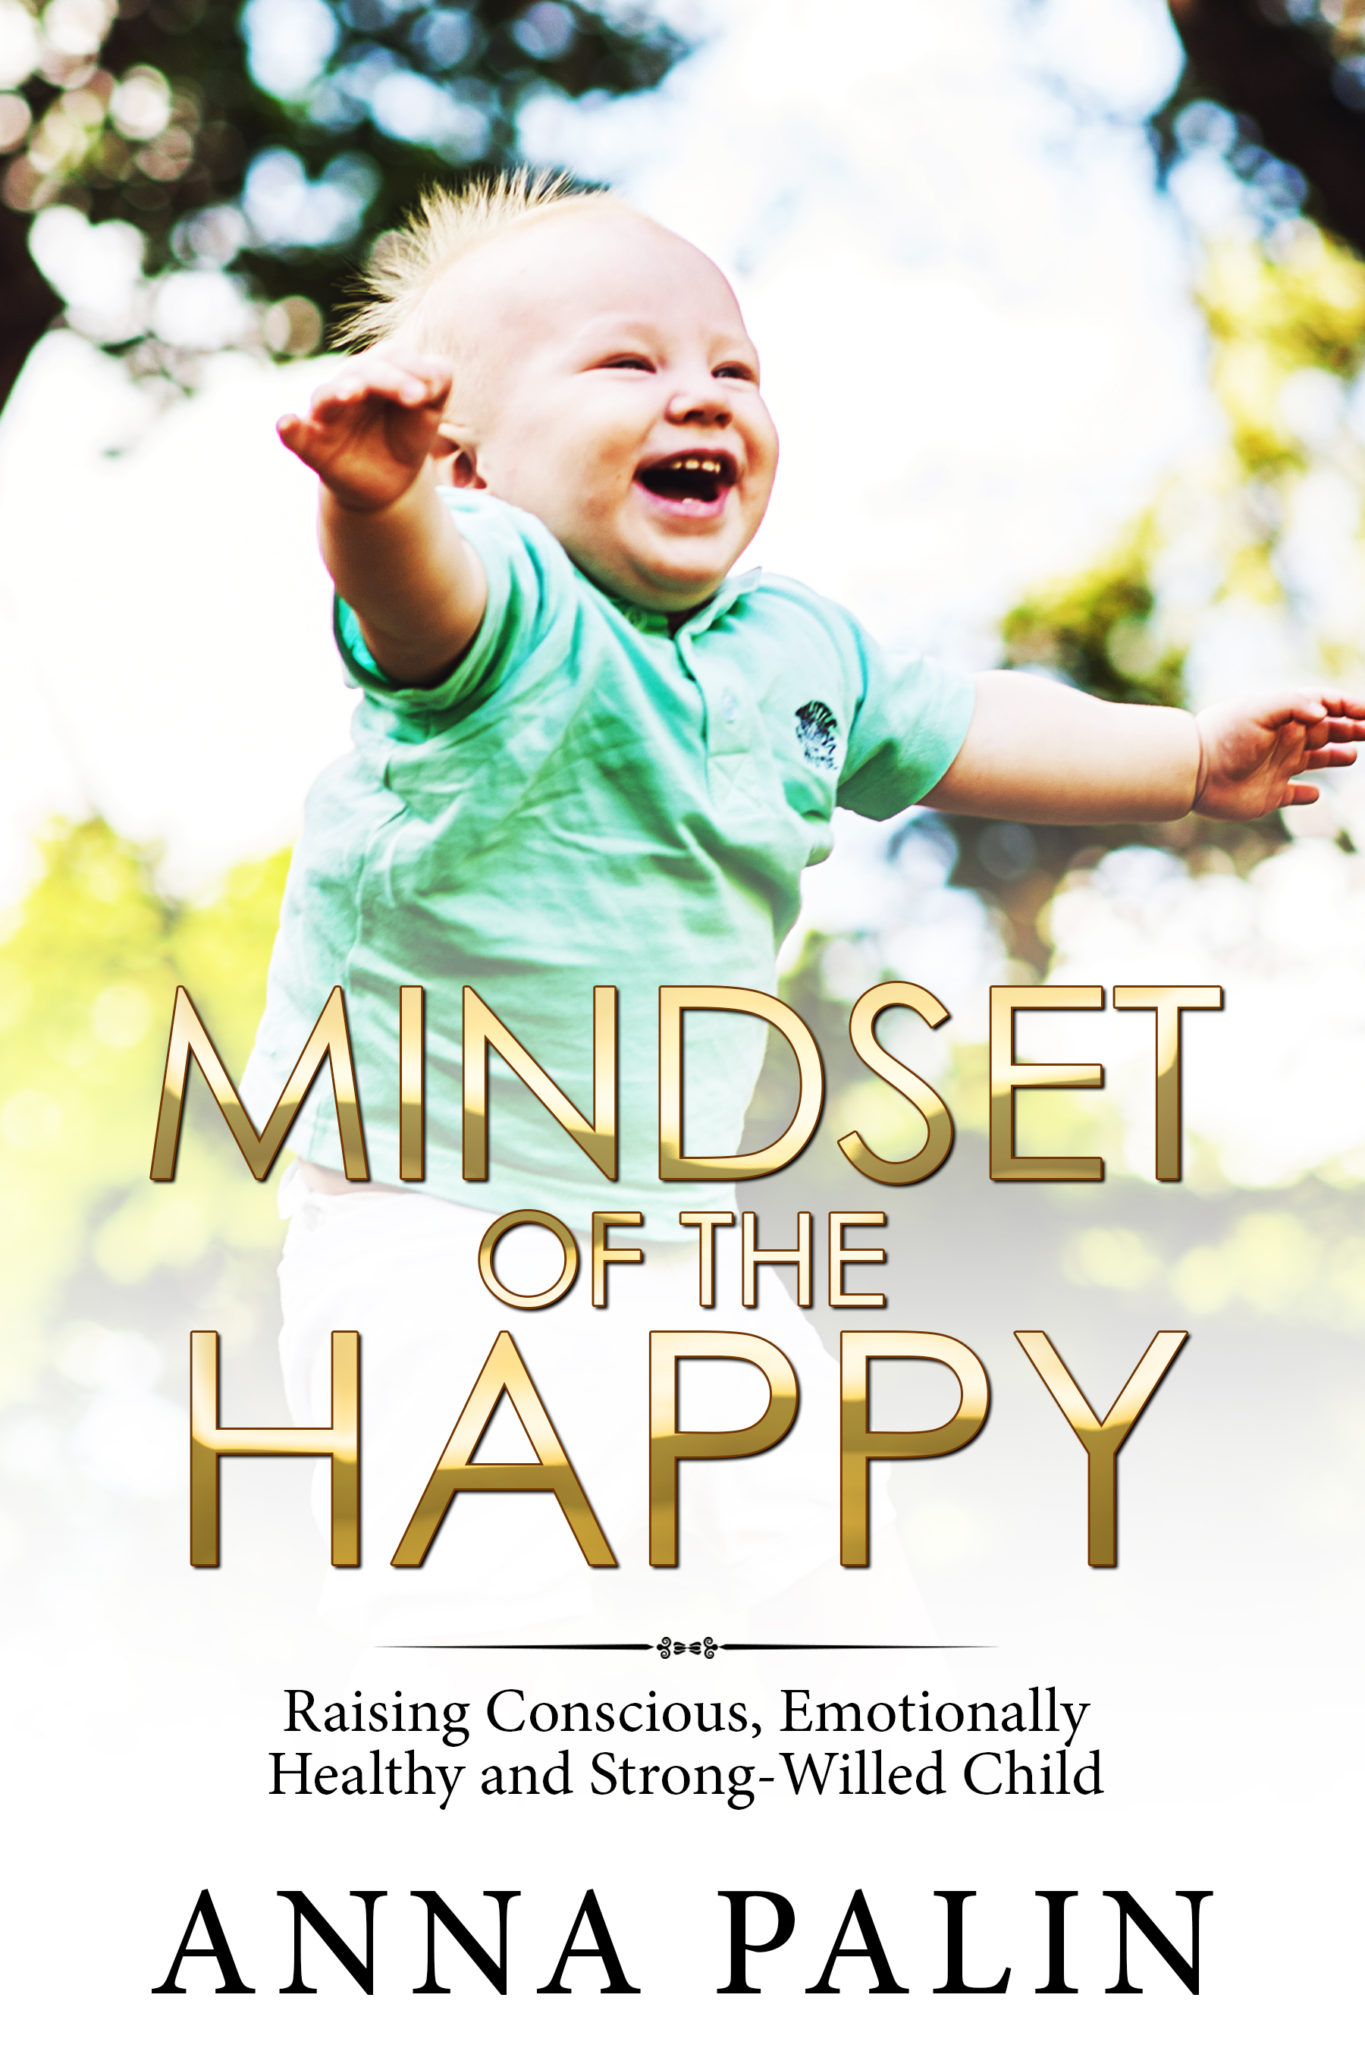 FREE: Mindset of the Happy. Raising Conscious, Emotionally Healthy and Strong-Willed Child by Anna Palin